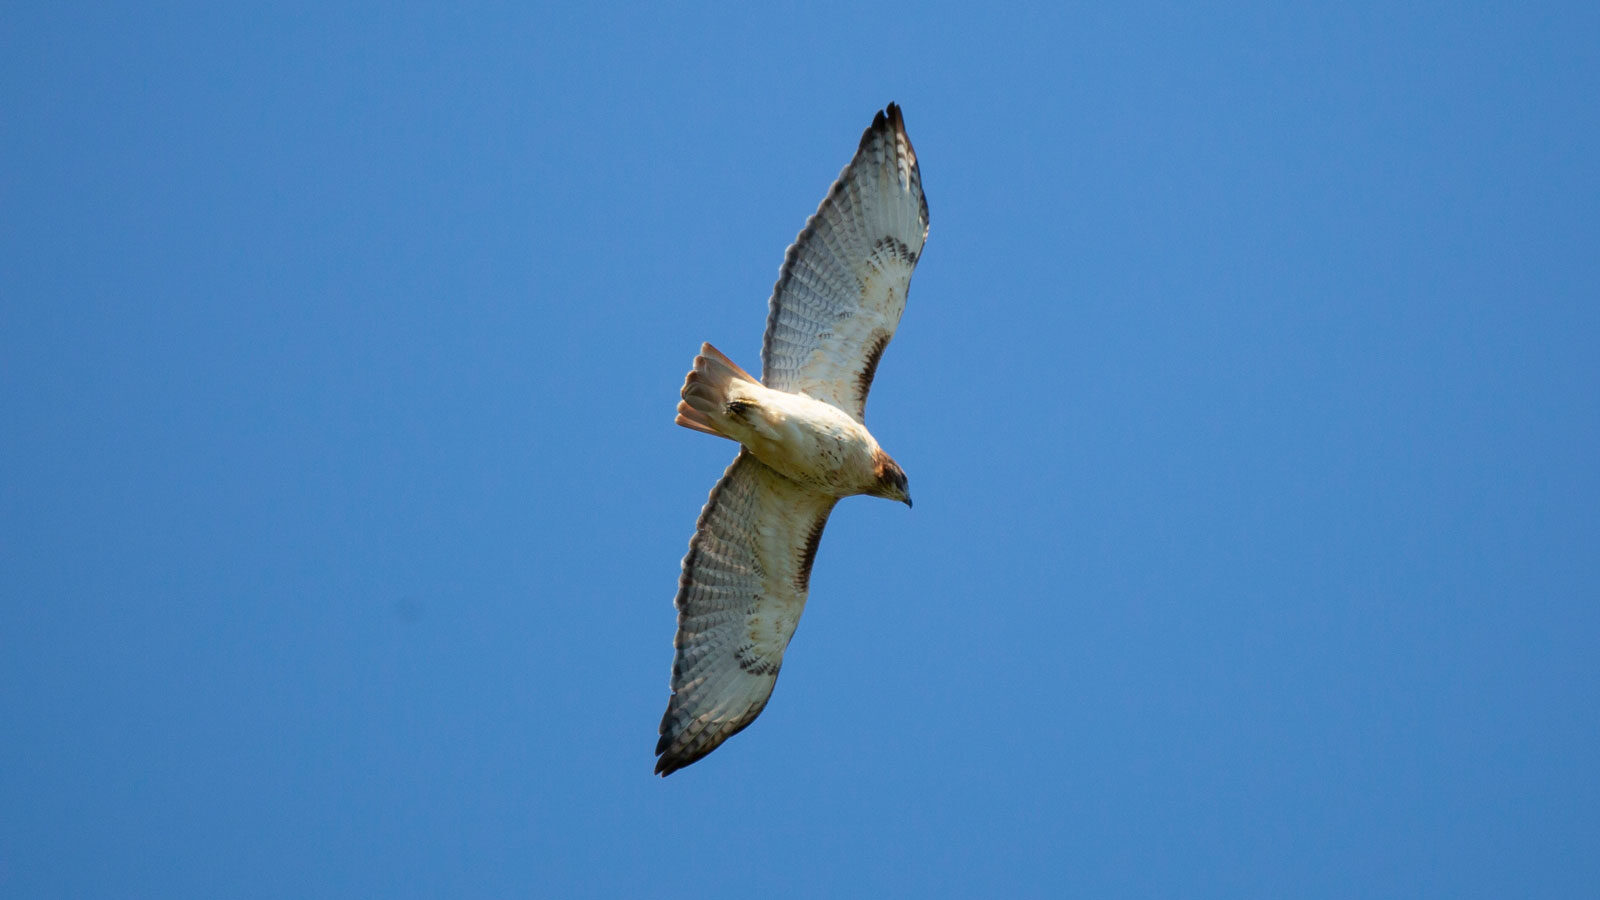 Red-tailed hawk soaring in the sky